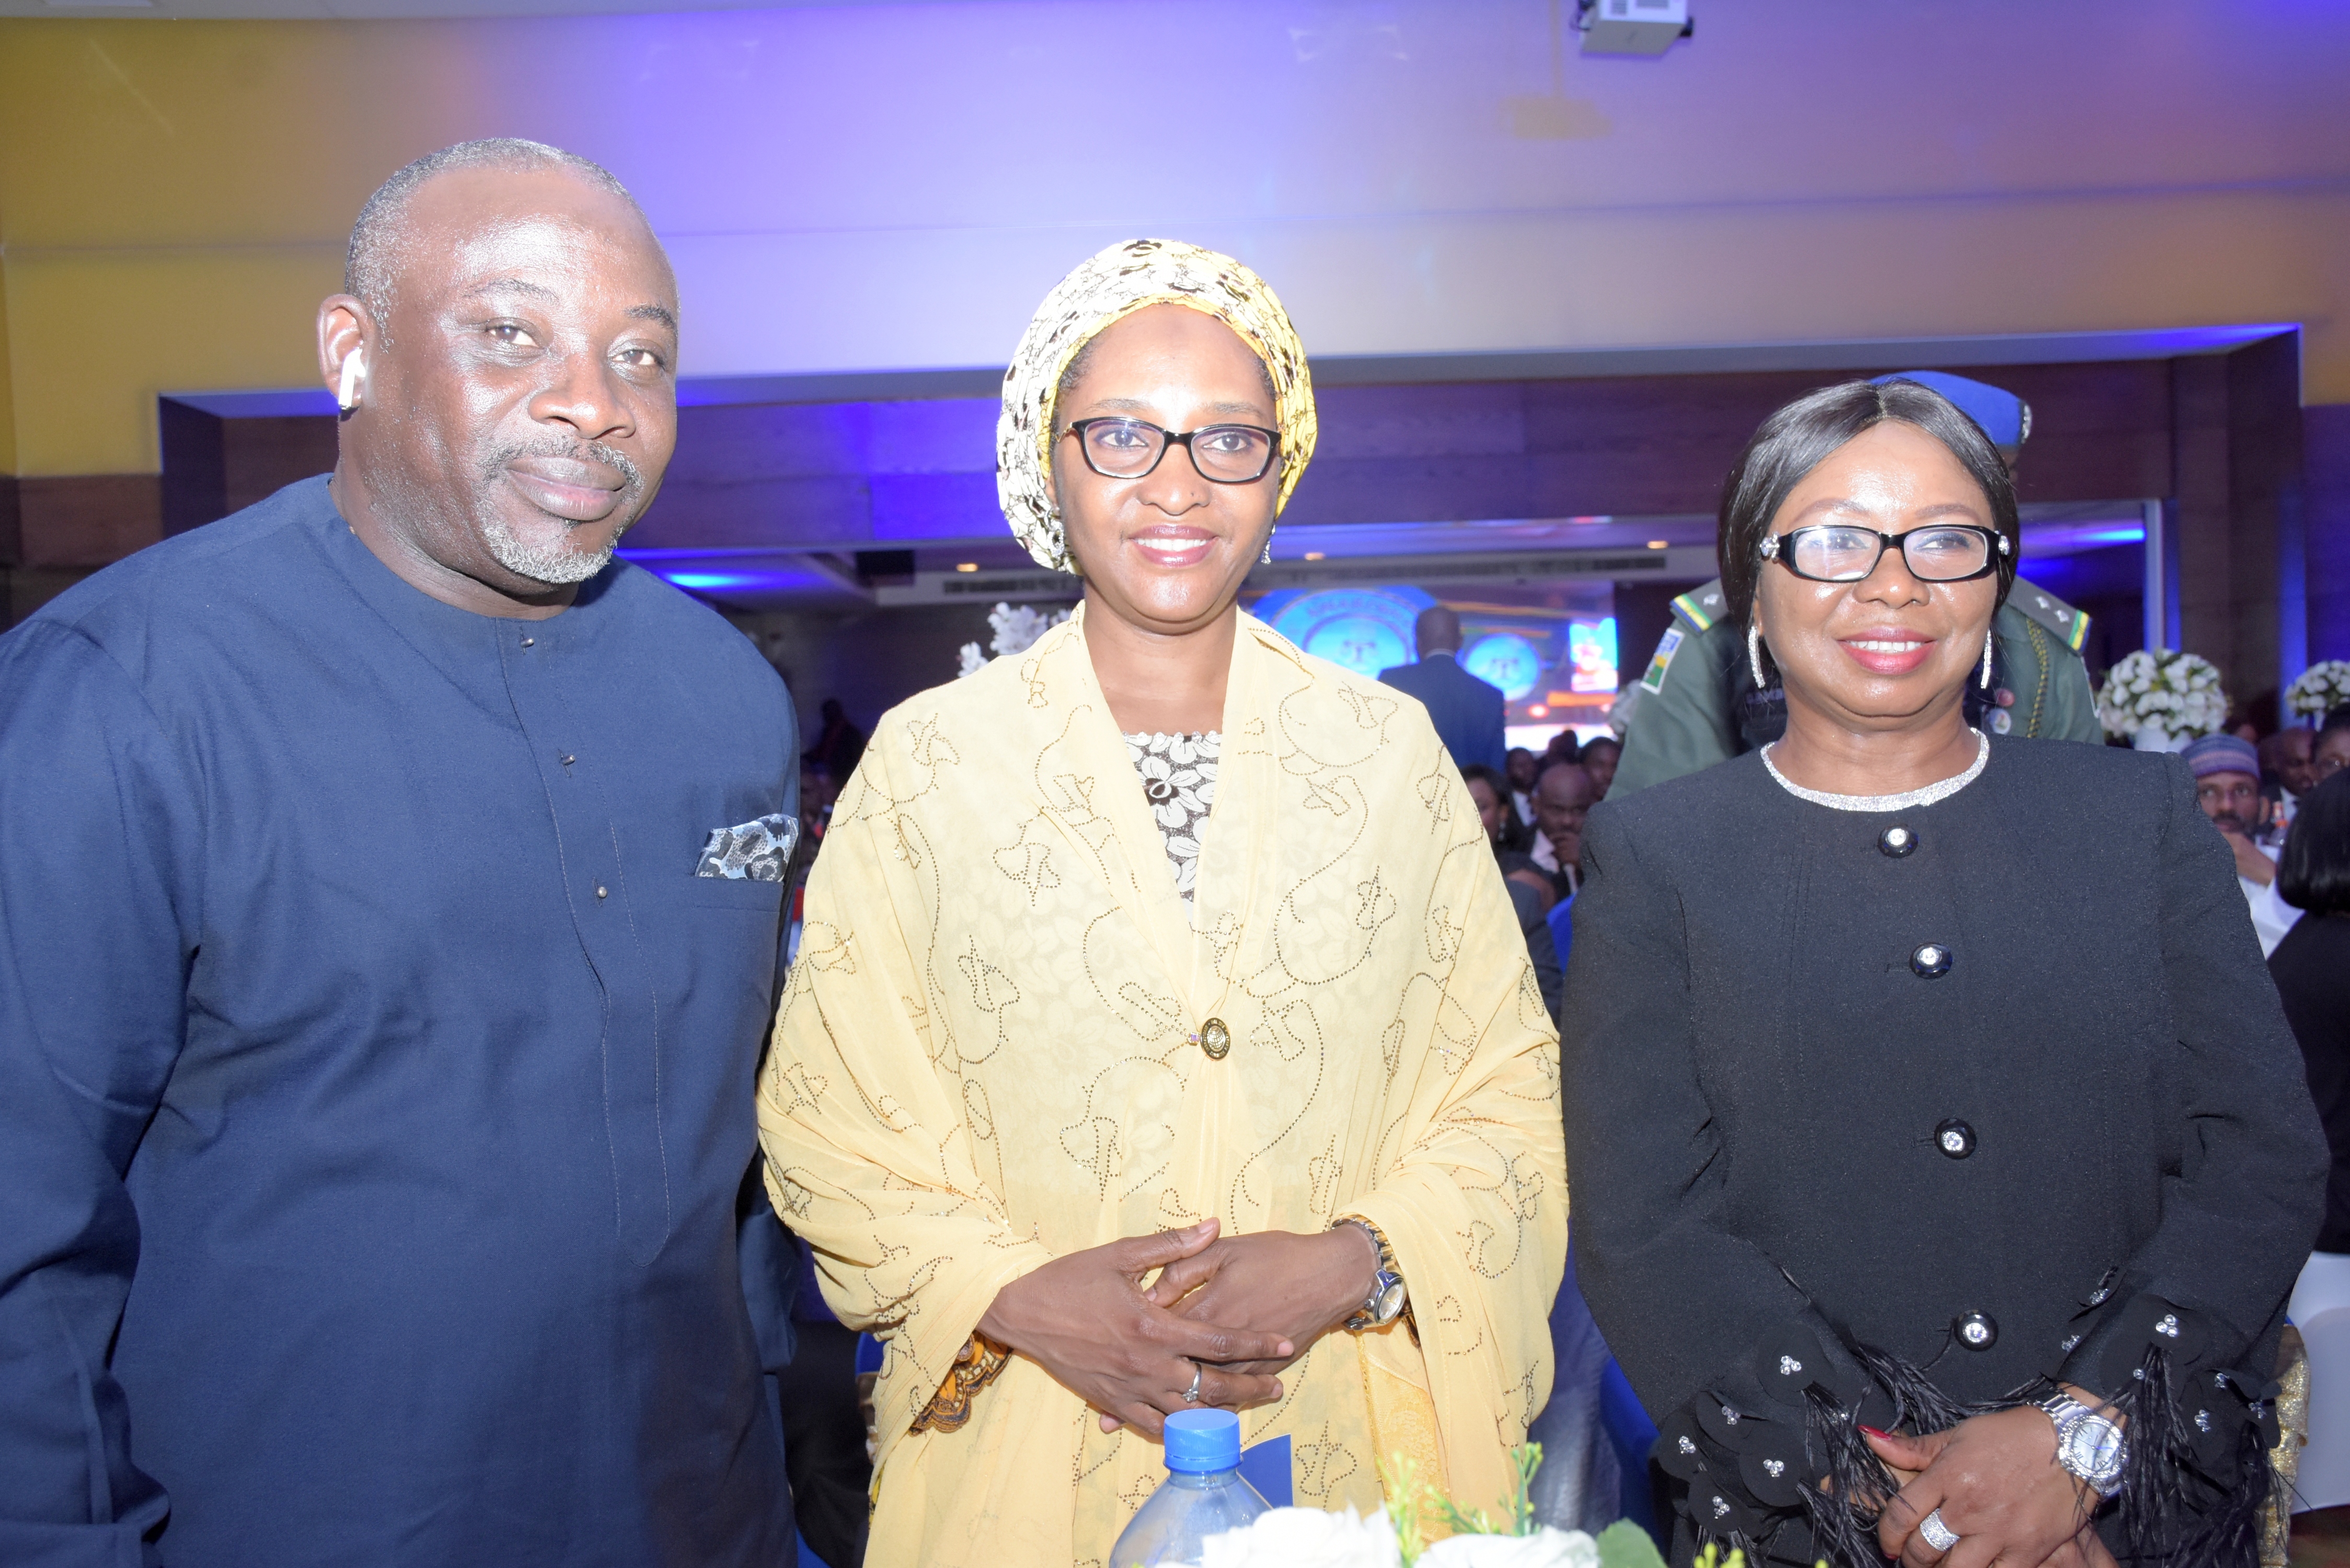 The Minister of Finance, Mrs Zainab Ahmed (middle), Chairman House Committee on Capital Market, Mr. Tajudeen Yusuf (left) and Ag. Director-General, Securities and Exchange Commission, Ms Mary Uduk (Right) at the SEC Awards Night in Lagos on Tuesday, March 19, 2019.